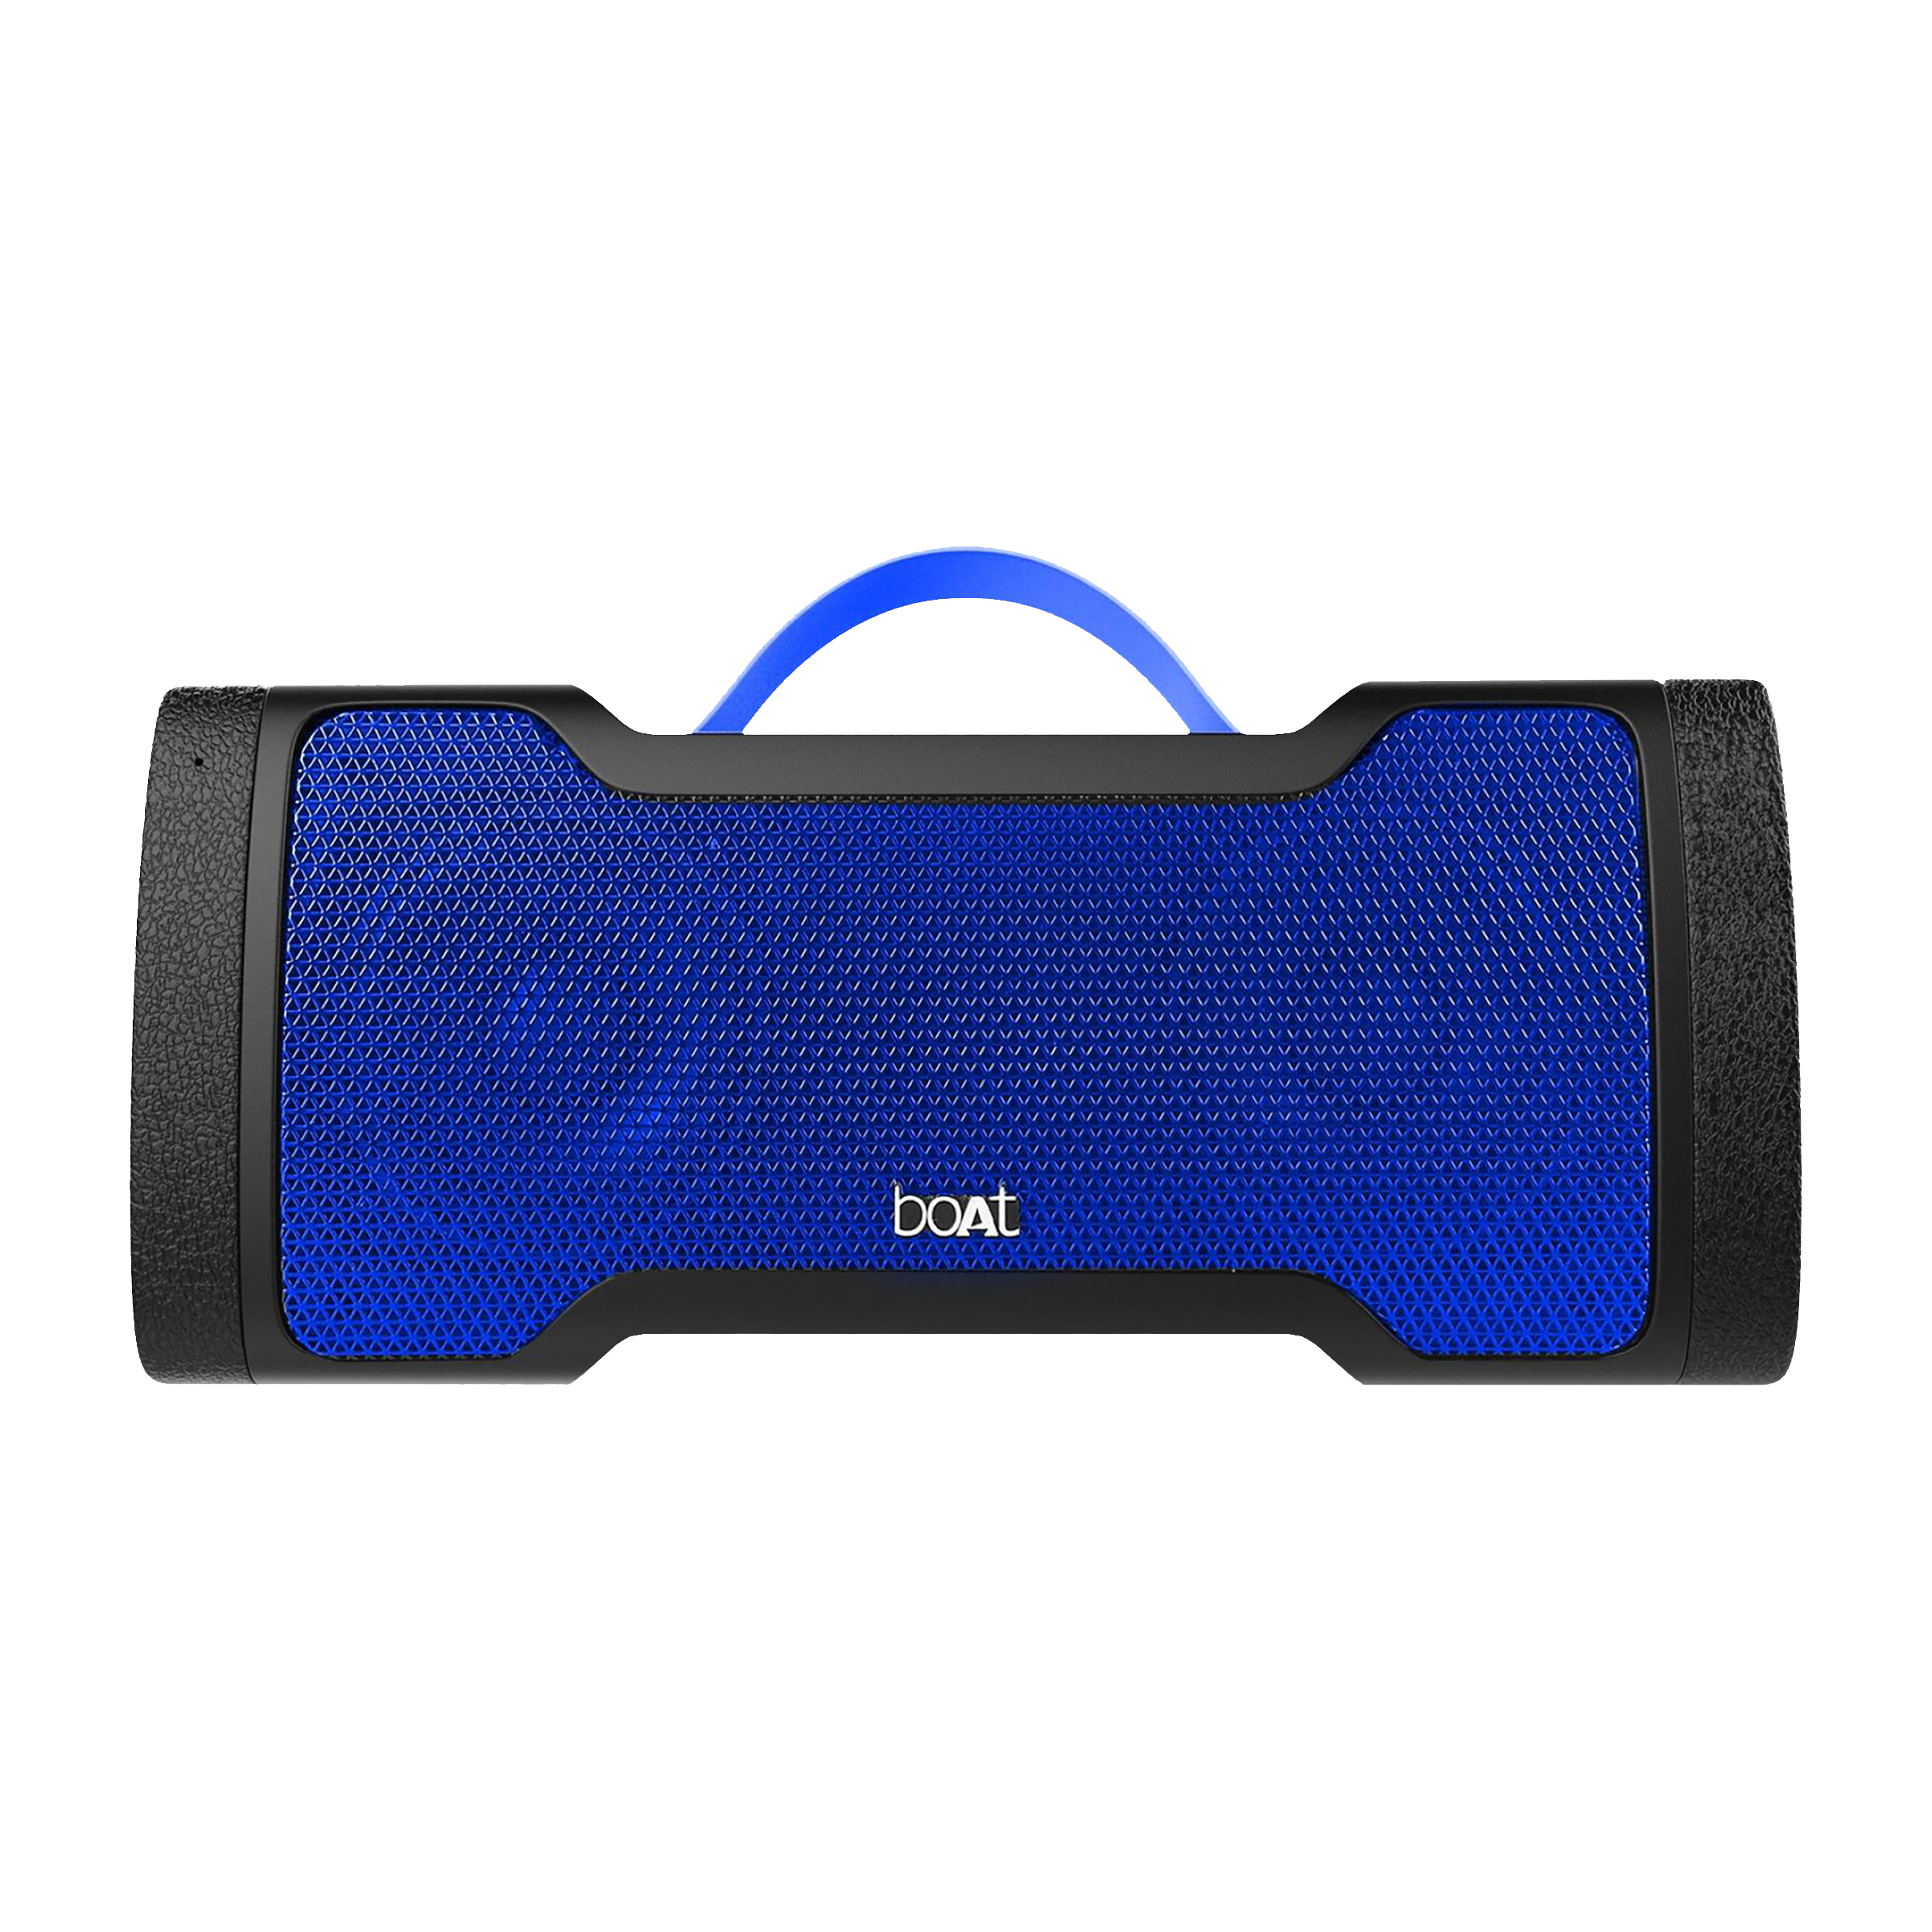 boAt Stone 1000 14W Portable Bluetooth Speaker (IPX5 Waterproof, 10 Hours Playtime, Stereo Channel, Blue)